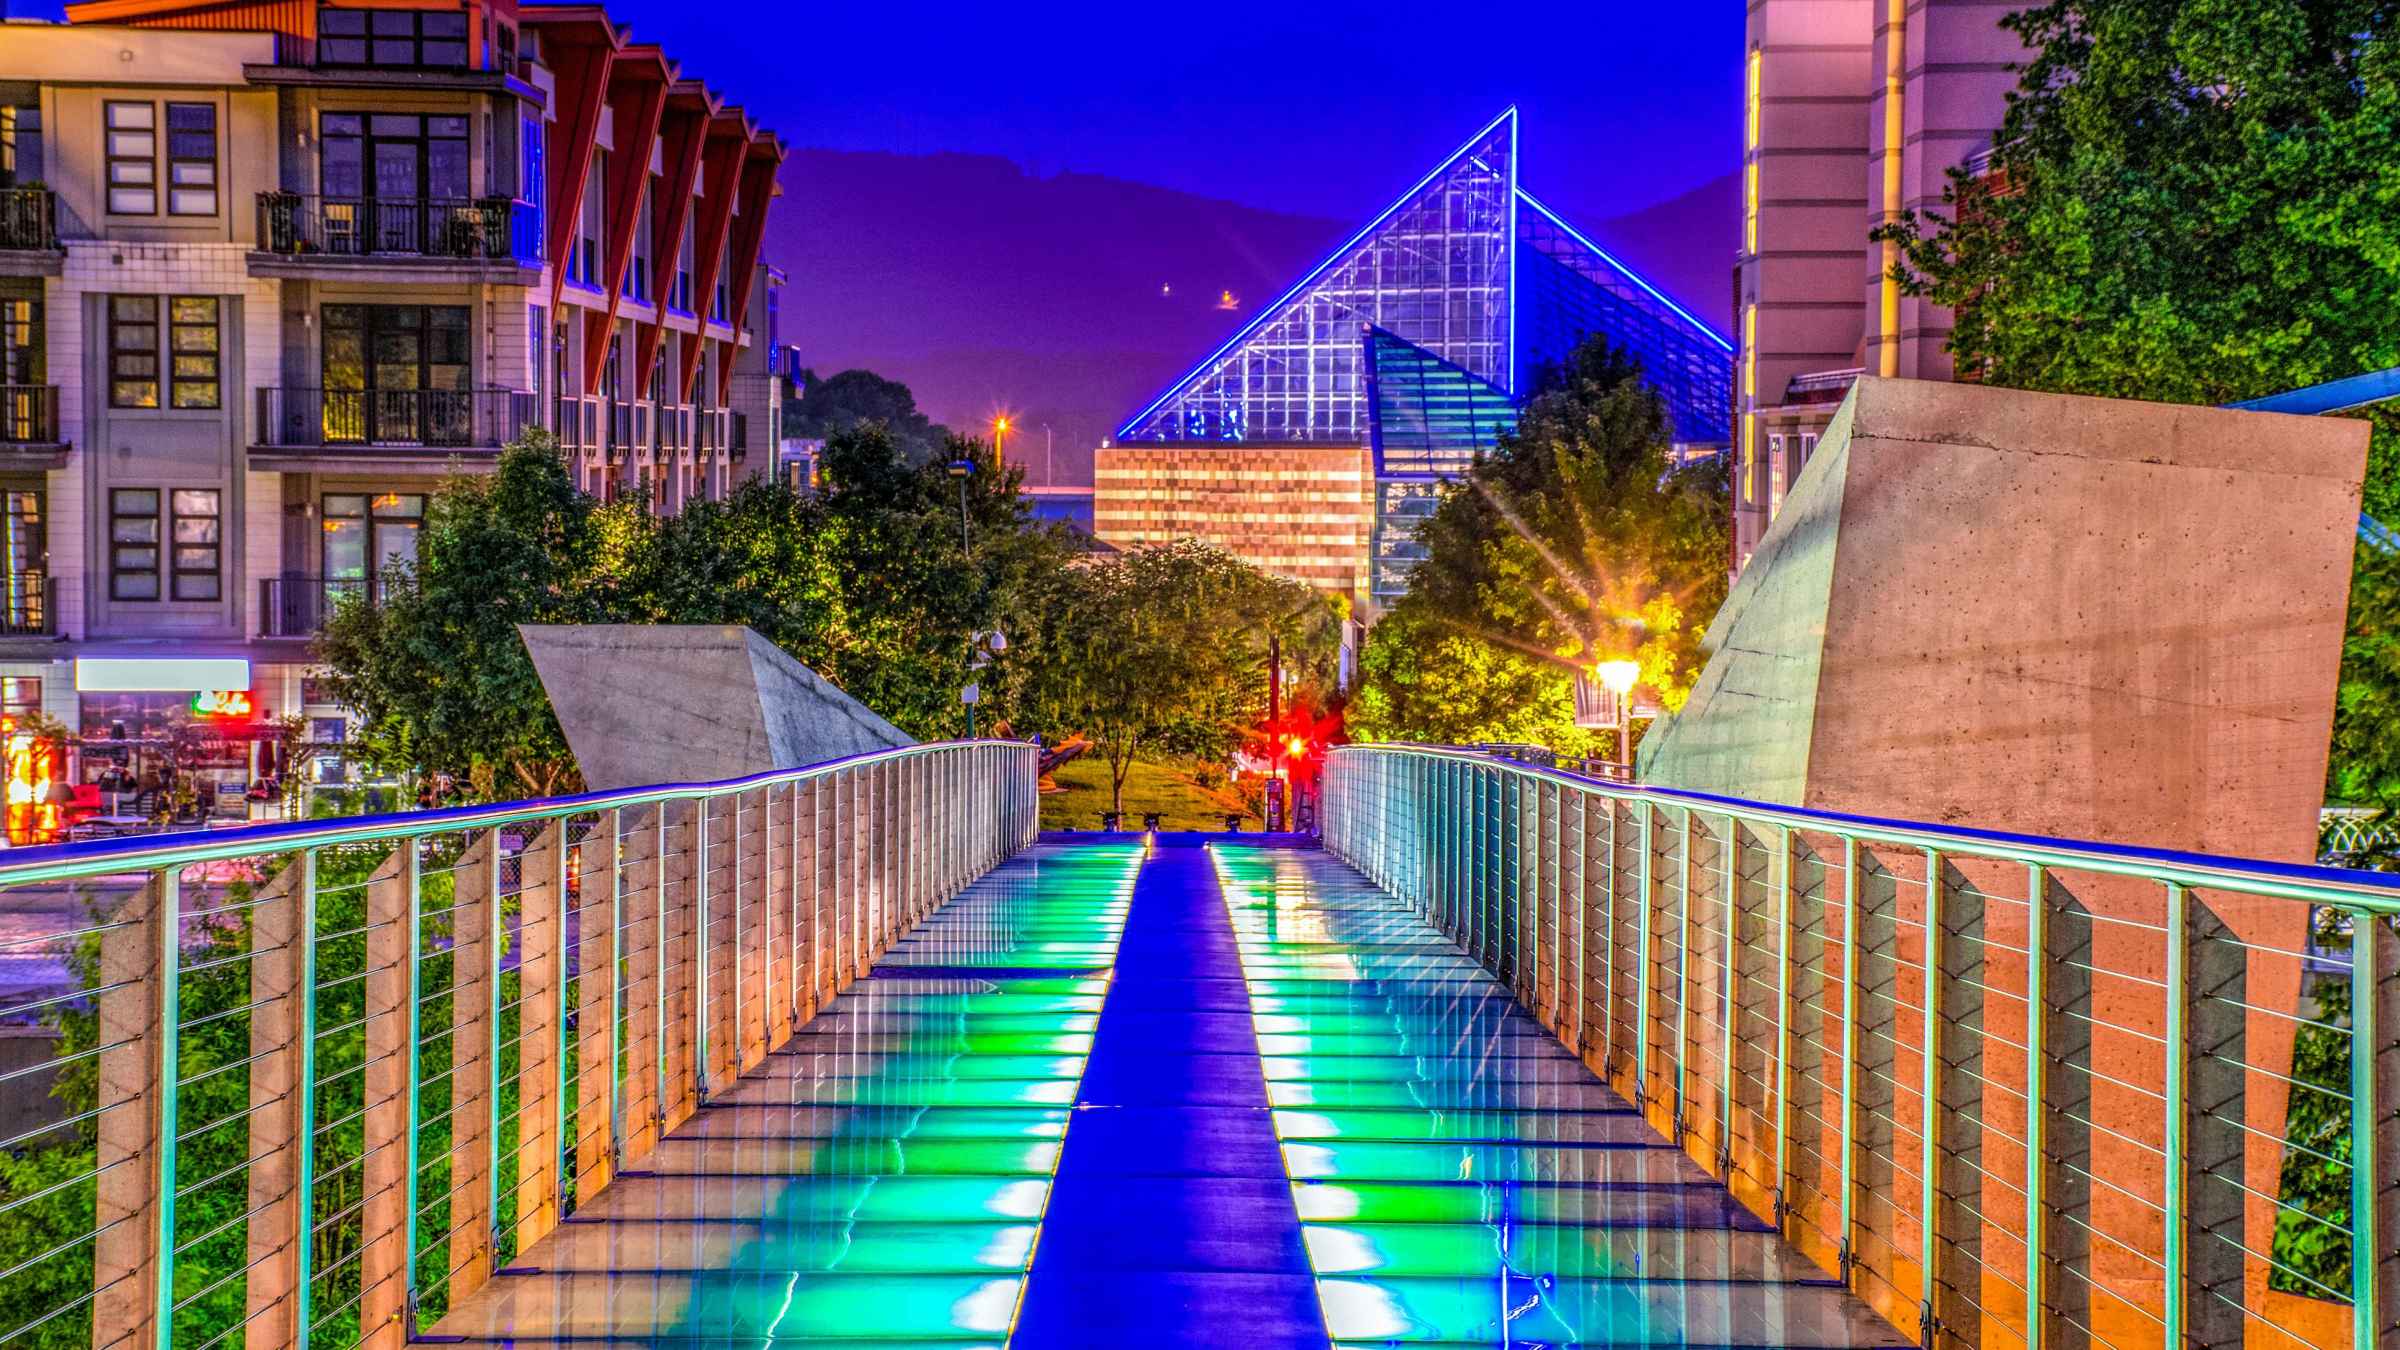 Chattanooga 2021: Top 10 Tours & Activities (with Photos) - Things to